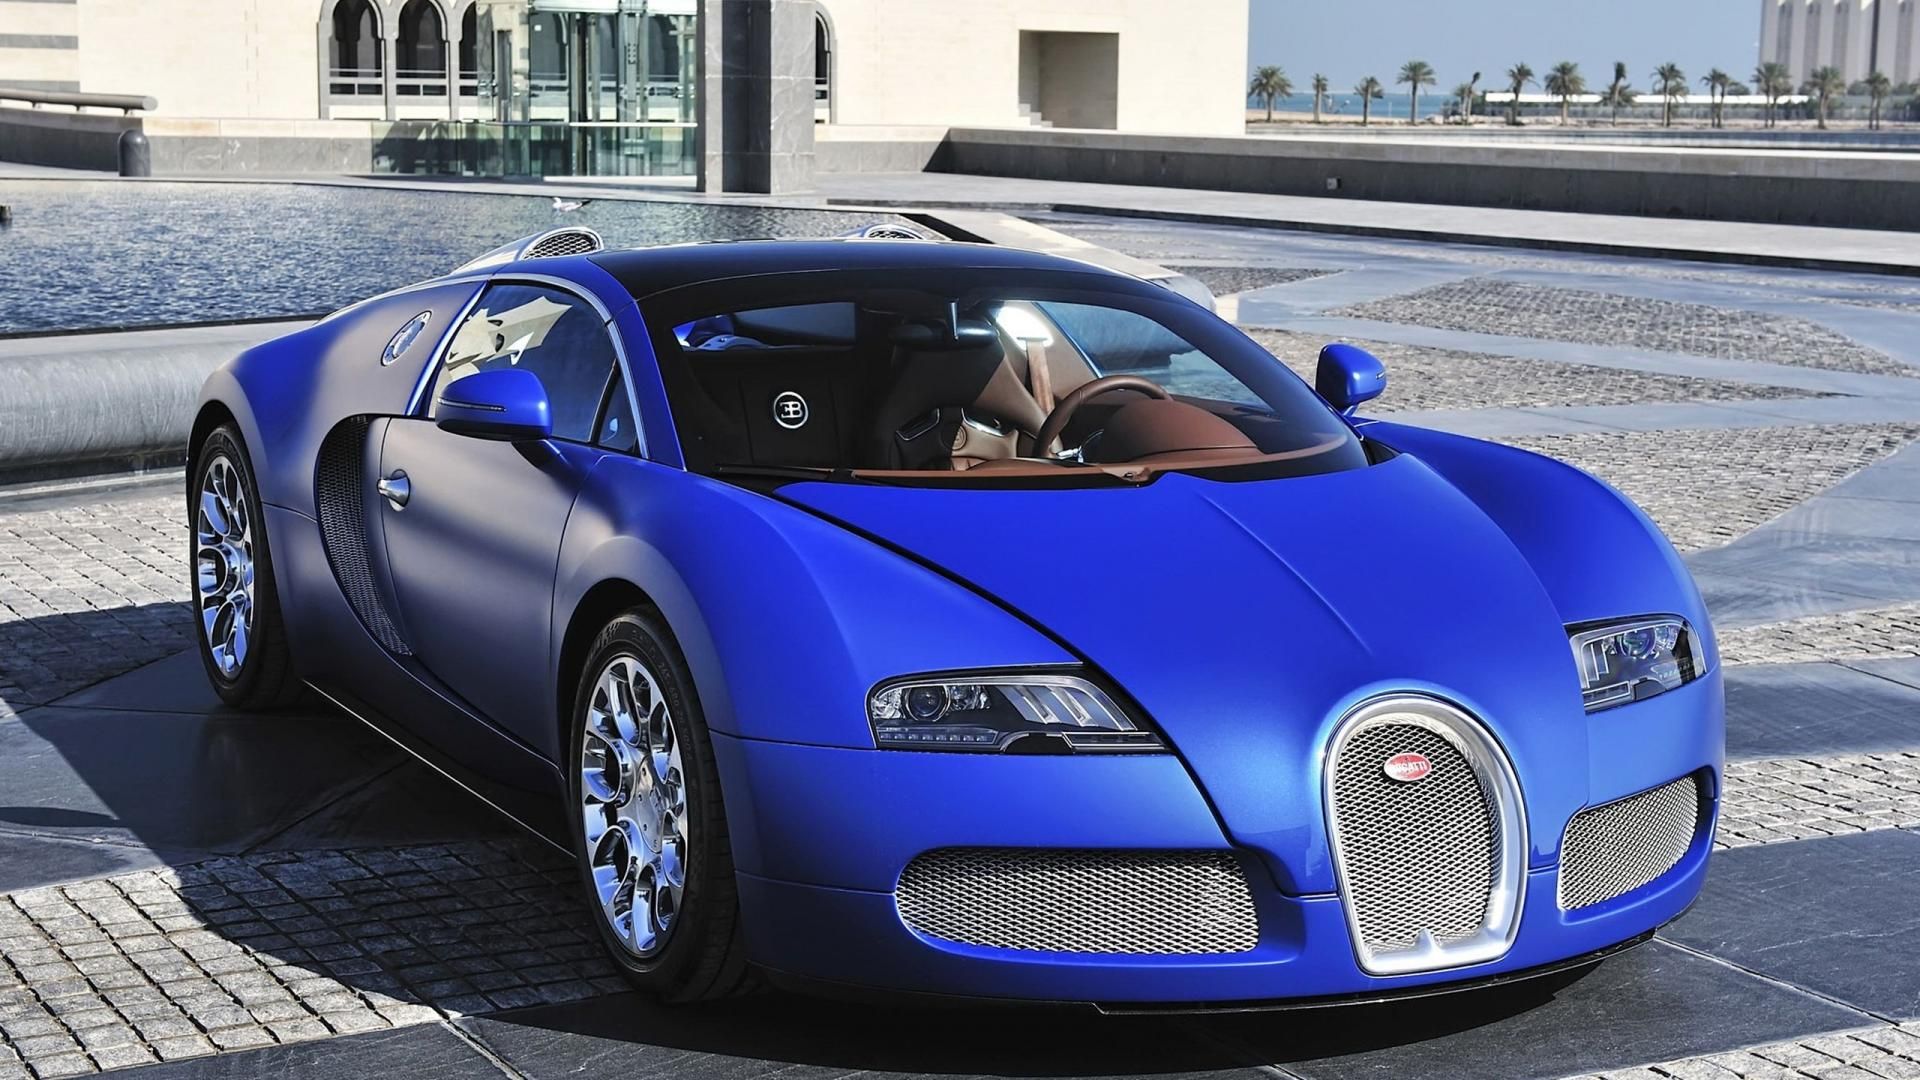 Free Download Download Bugatti Veyron Images Hd Wallpaper Of Car 1920x1080 For Your Desktop Mobile Tablet Explore 78 Bugatti Veyron Hd Wallpaper Bugatti Veyron Wallpaper For Desktop Bugatti Wallpapers